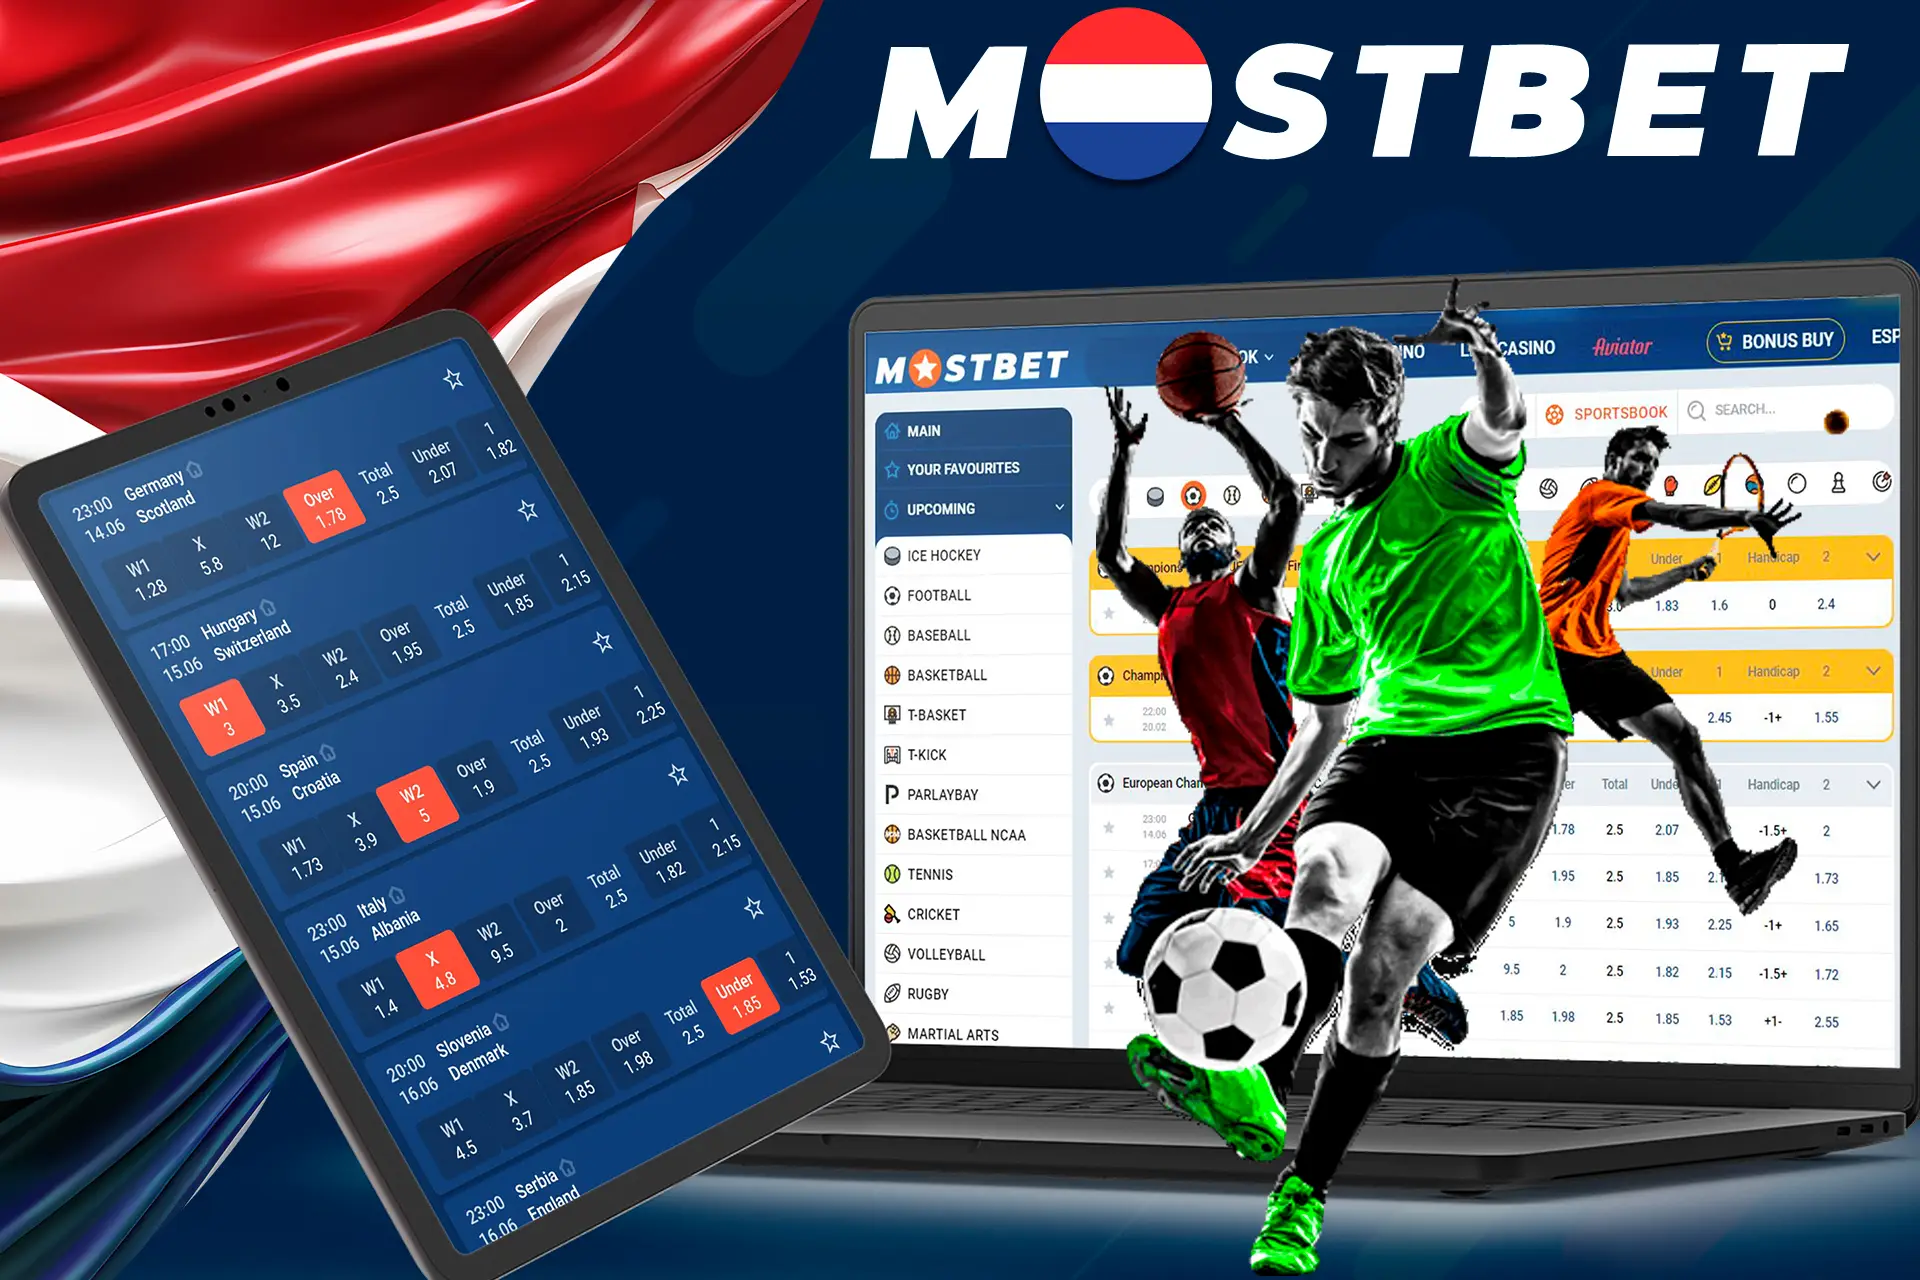 Various betting options on Mostbet